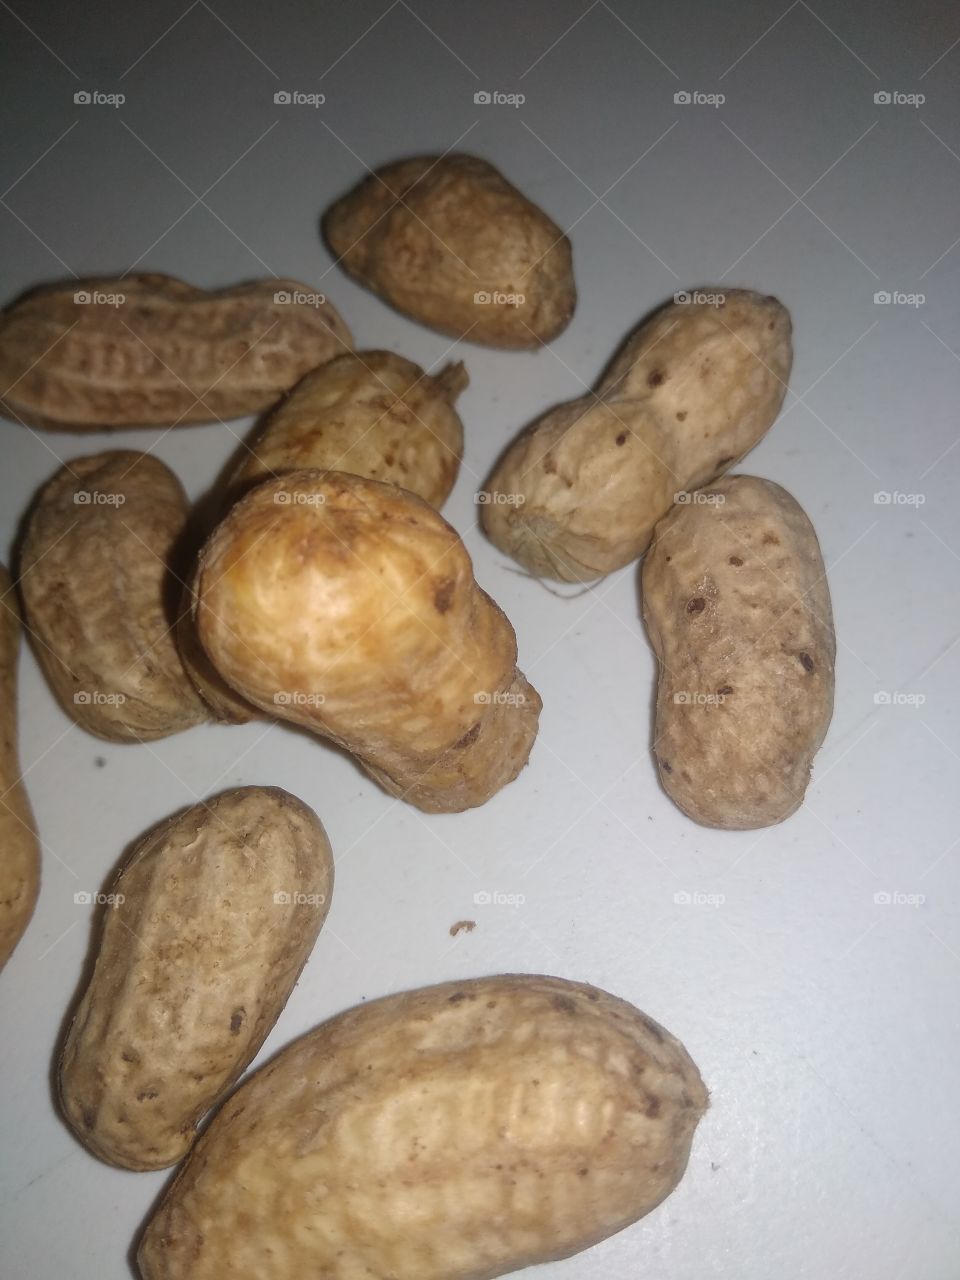 I like boiled peanuts. It's soft and nutritious.